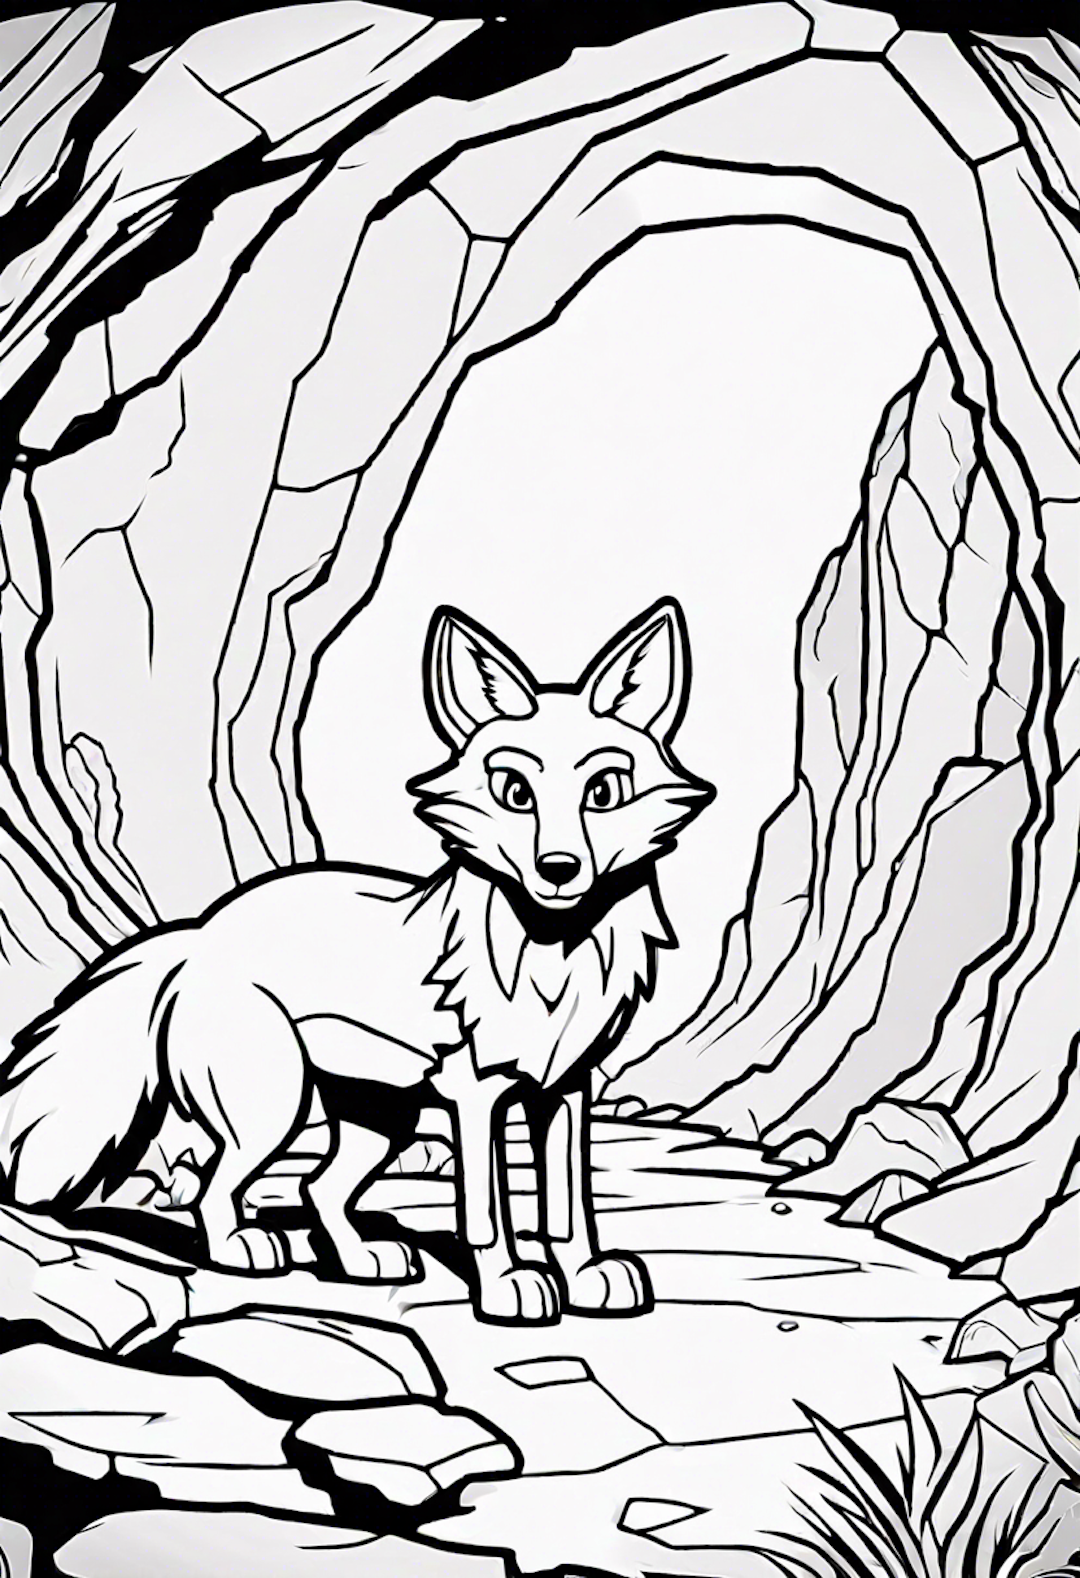 A Brave Star Exploring A Cave With A Cautious Fox